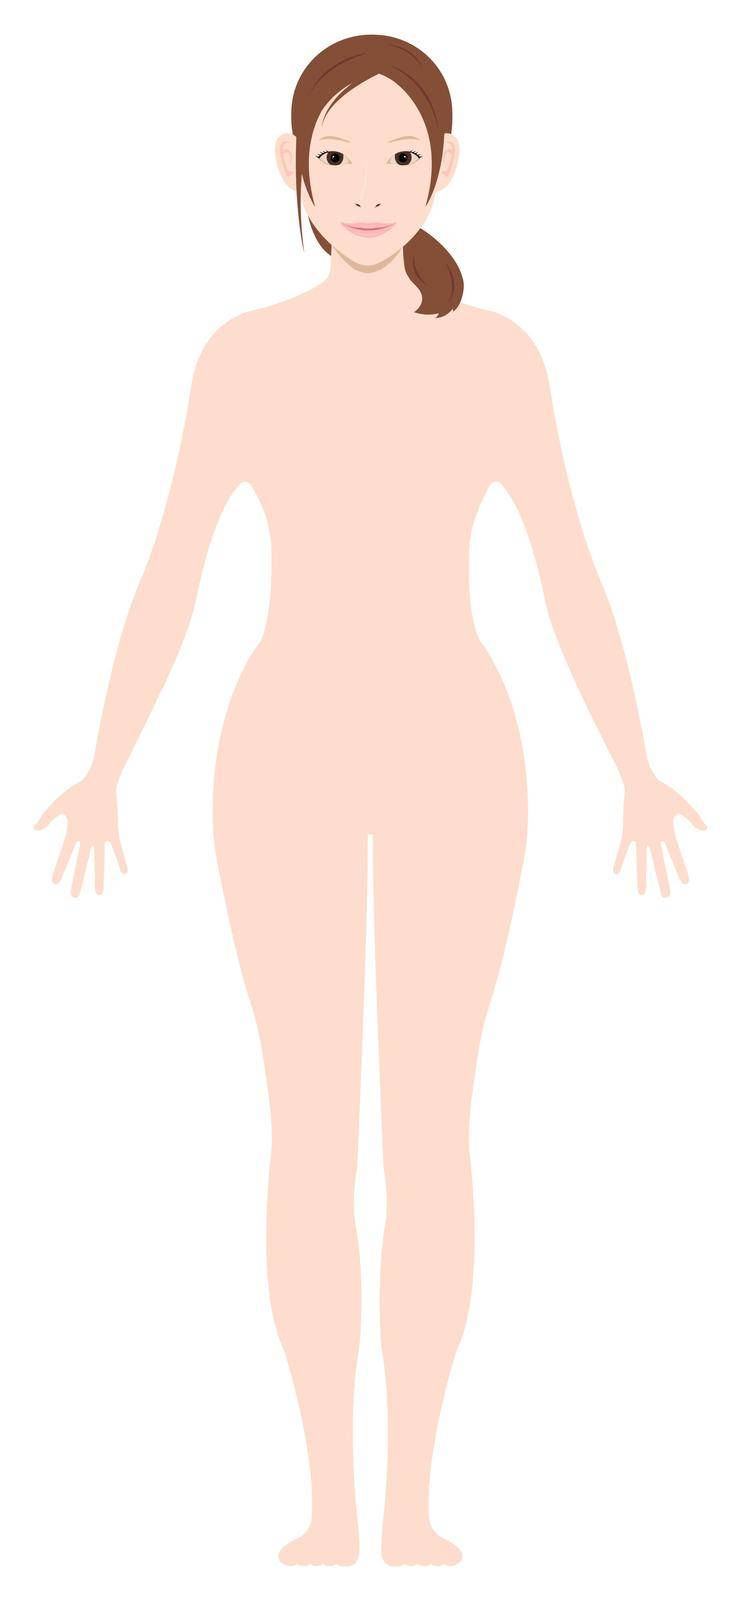 Standing woman's  nude body silhouette / outline shape vector  illustration